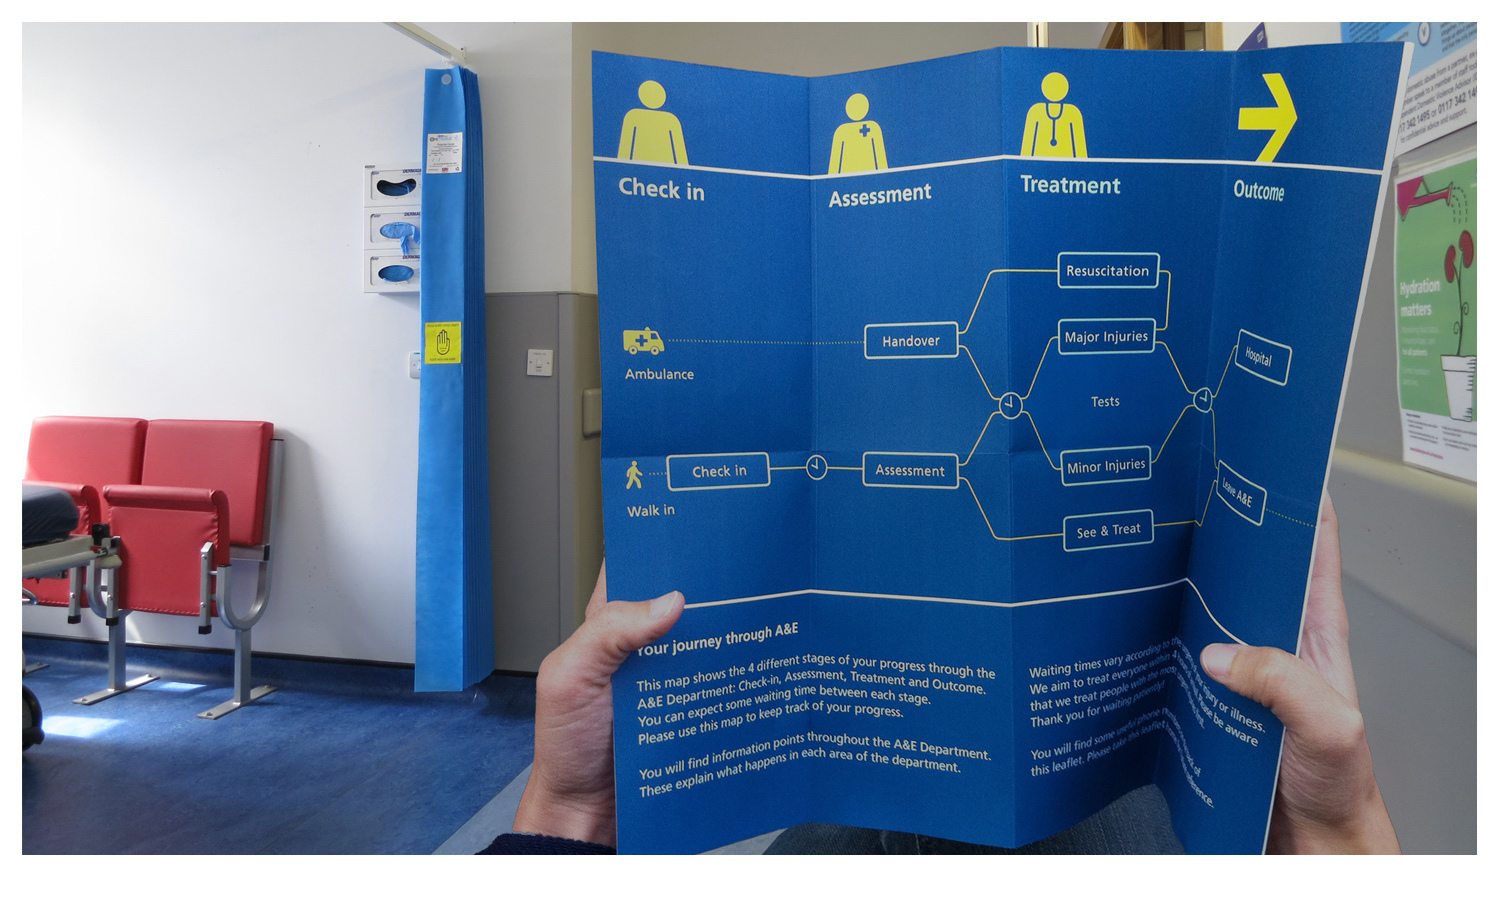  Printed leaflets ensure patients have key information about the department at all times. 